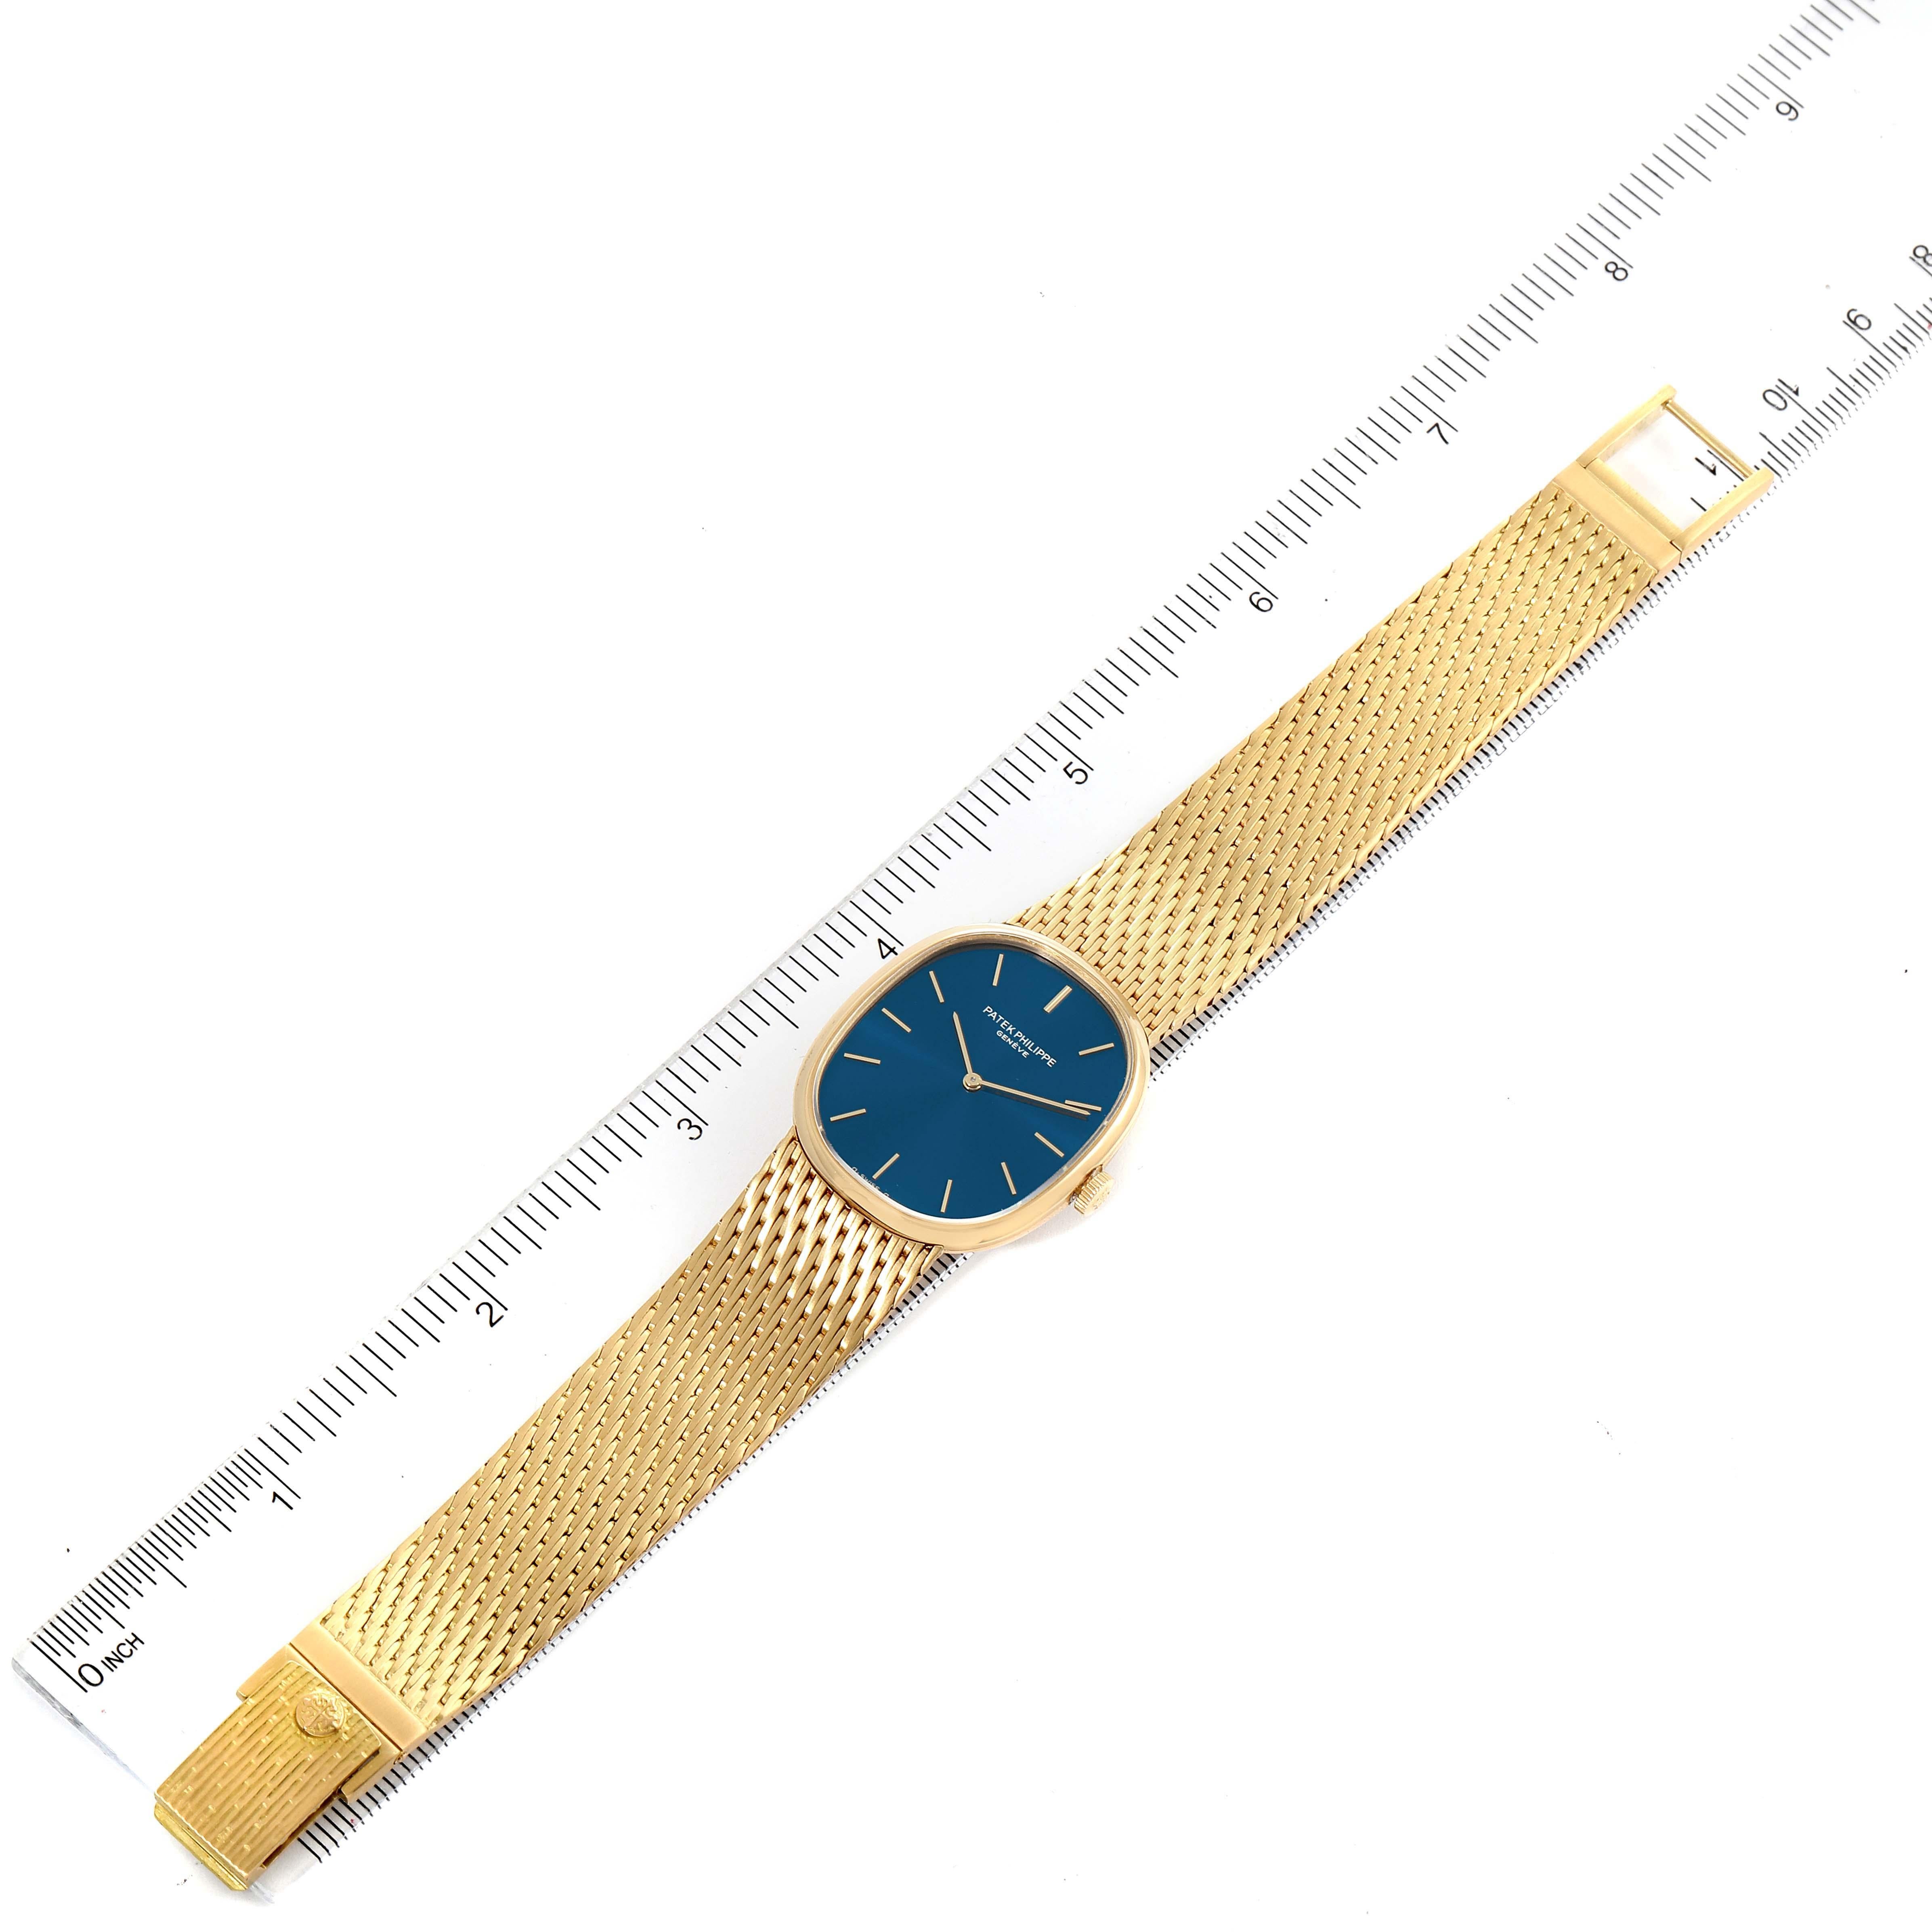 Patek Philippe Golden Ellipse 18k Yellow Gold Blue Dial Watch 3748 For Sale 3